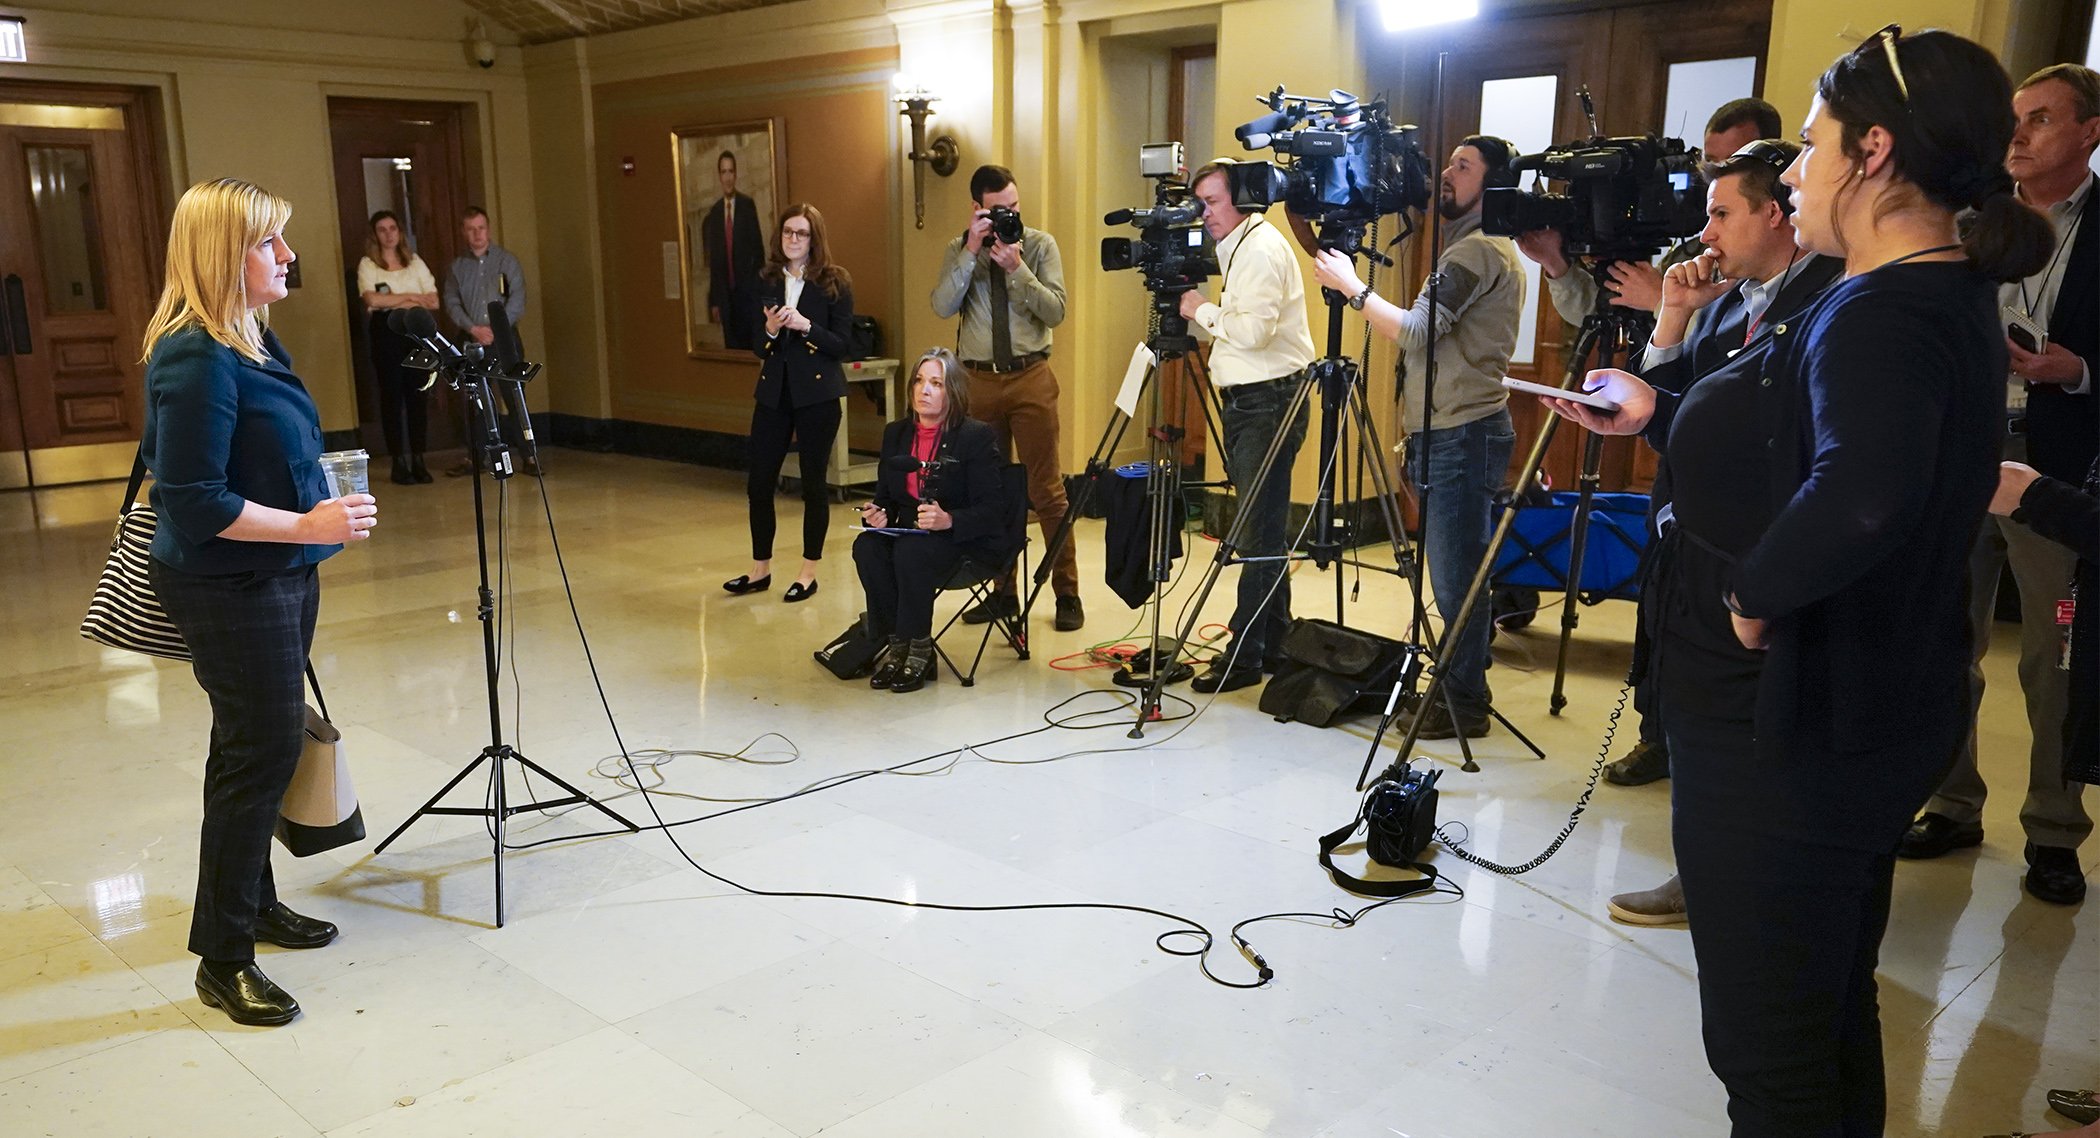 House Speaker Melissa Hortman addresses the media after legislative leaders met with Gov. Tim Walz Monday to discuss legislation to provide frontline worker pay and replenish the state’s unemployment insurance trust fund. (Photo by Paul Battaglia)